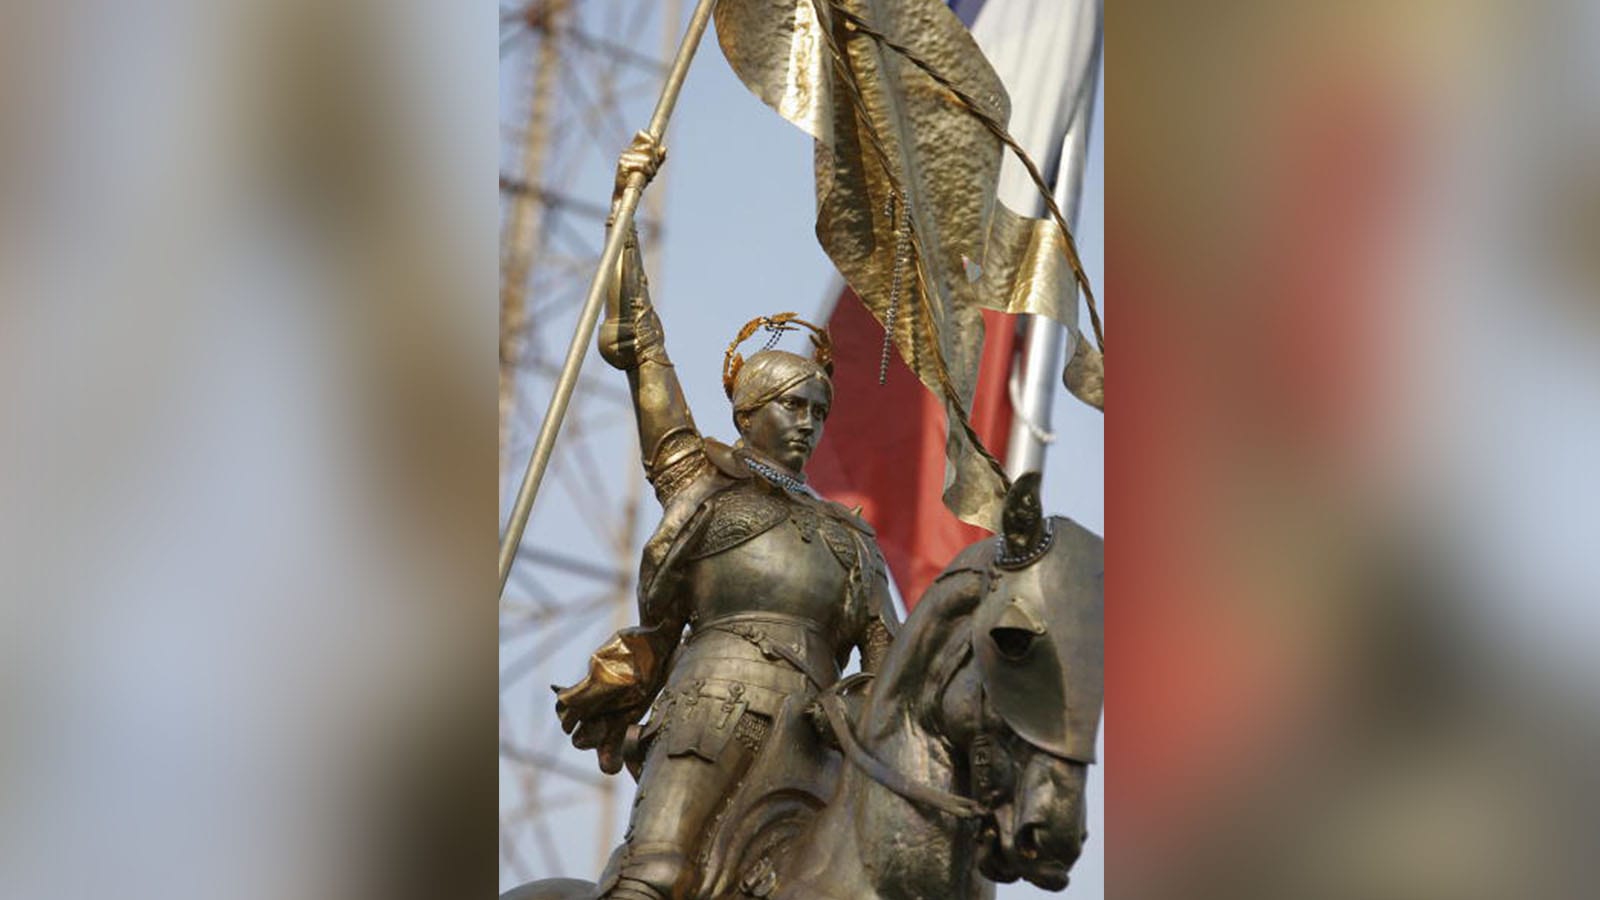 New Orleans, UNITED STATES: A statute of Joan d'Arc in the French Quarter of New Orleans, 08 August 2006. The French Quarter is the number one tourist destination in New Orleans, but almost one year after Hurricane Katrina devastated the city, tourism, the city's most important industry, is struggling. AFP PHOTO / Robyn BECK (Photo credit should read ROBYN BECK/AFP/Getty Images)